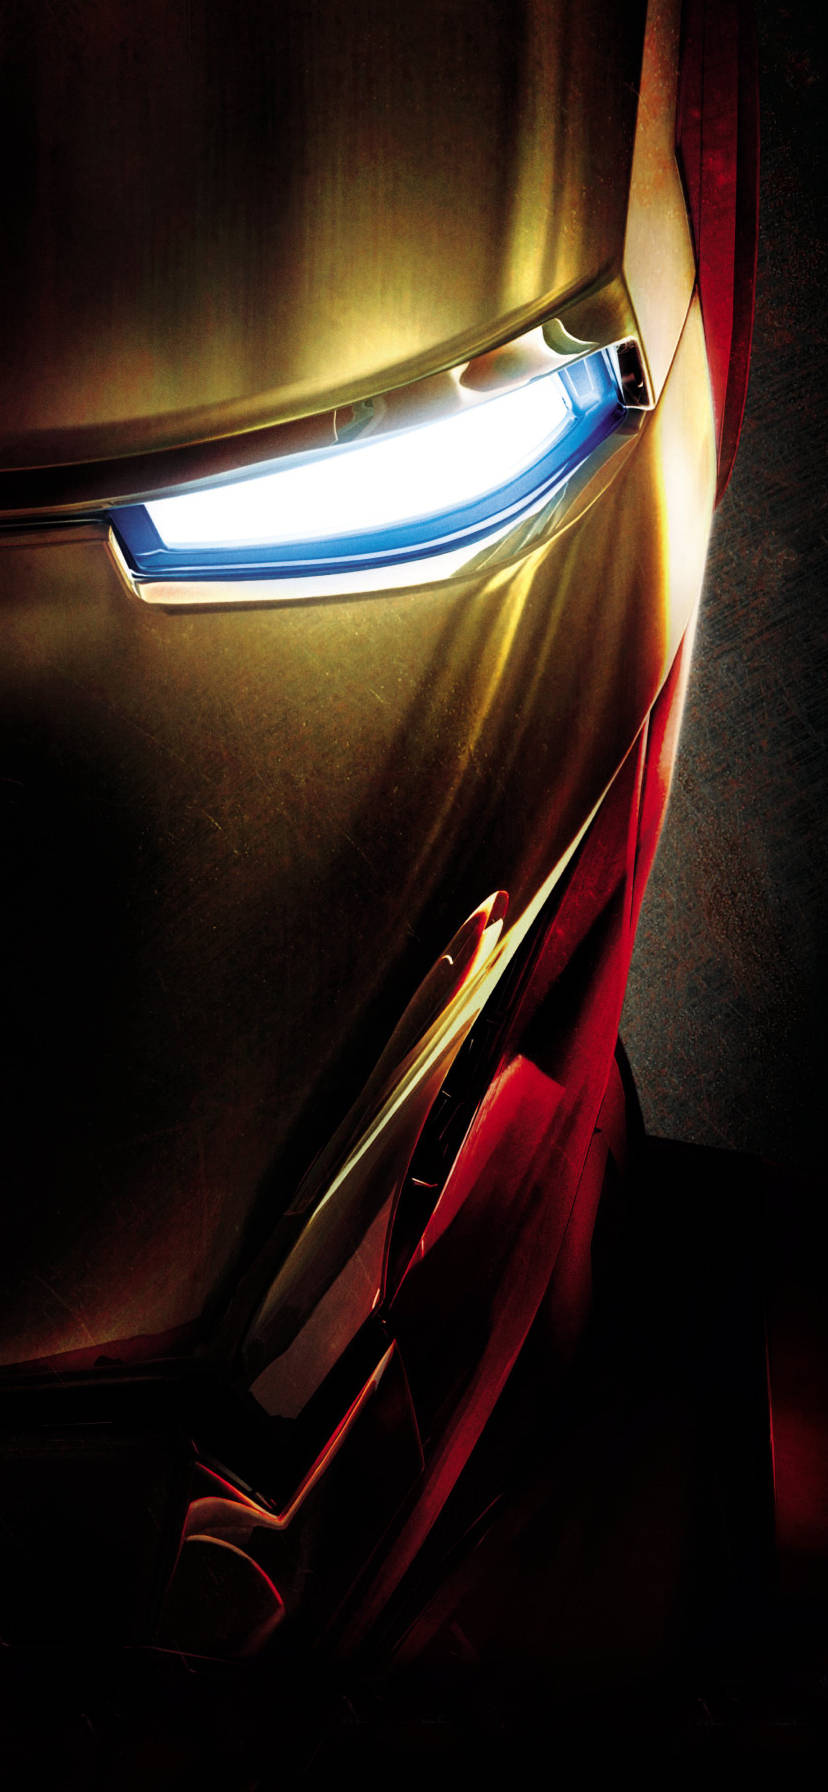 Unleash Your Inner Superhero With Our Marvel Iron Man Helmet Iphone Xr Wallpaper. Background